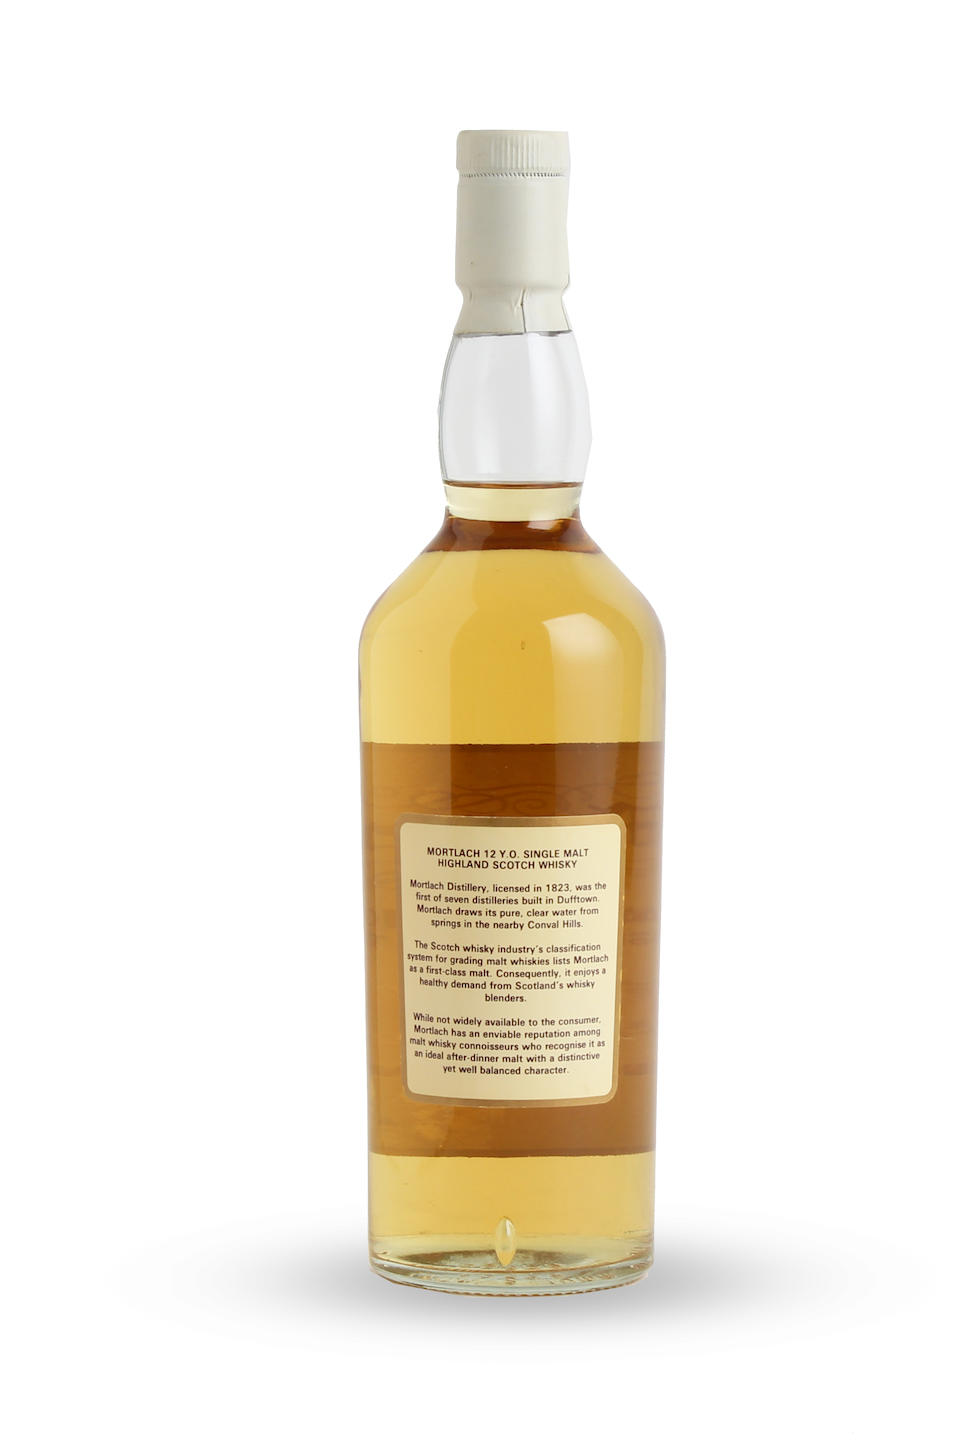 Mortlach-12 year old